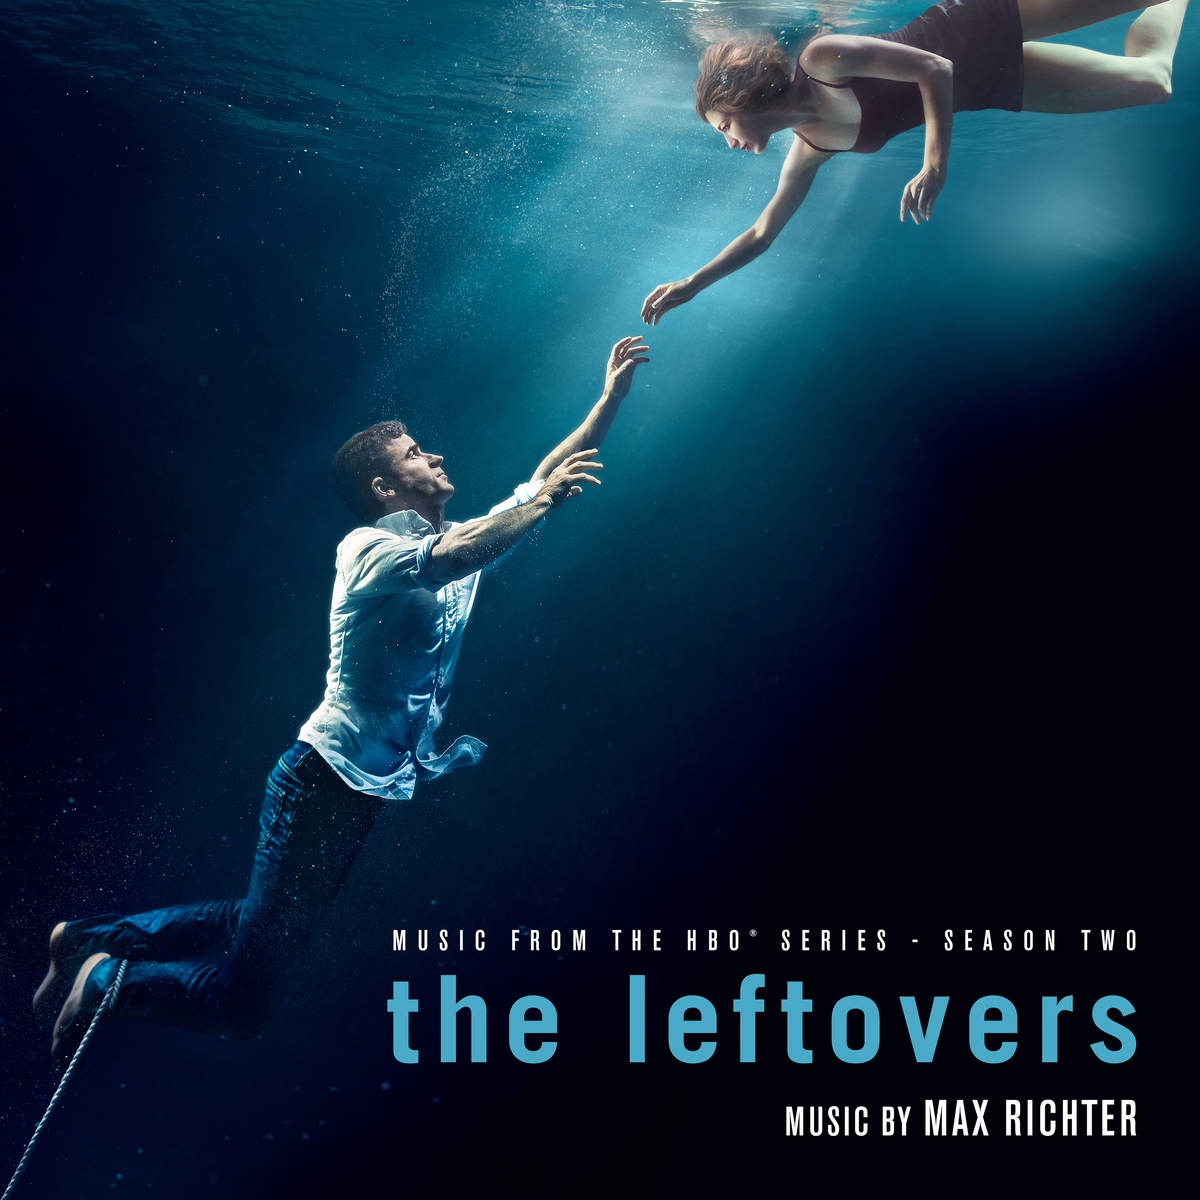 The Leftovers Music from the HBO Series Season 2